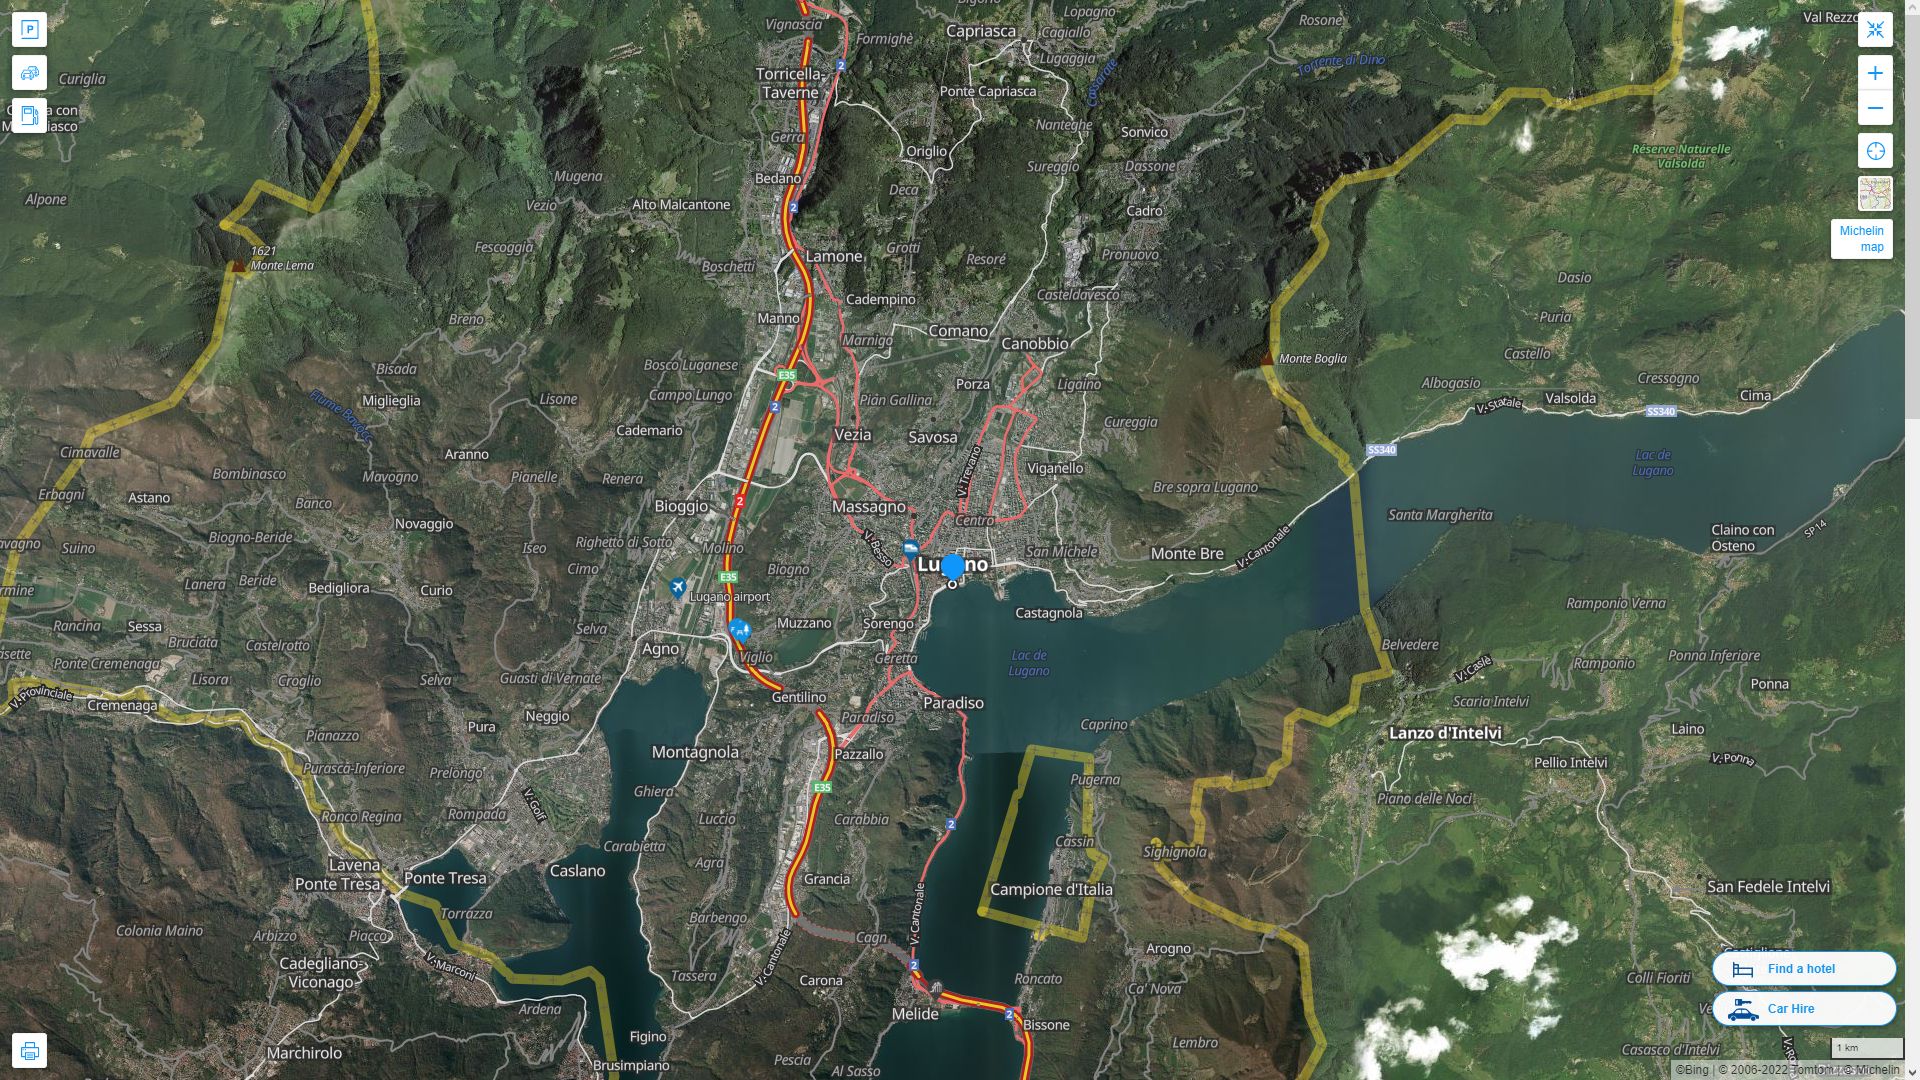 Lugano Highway and Road Map with Satellite View